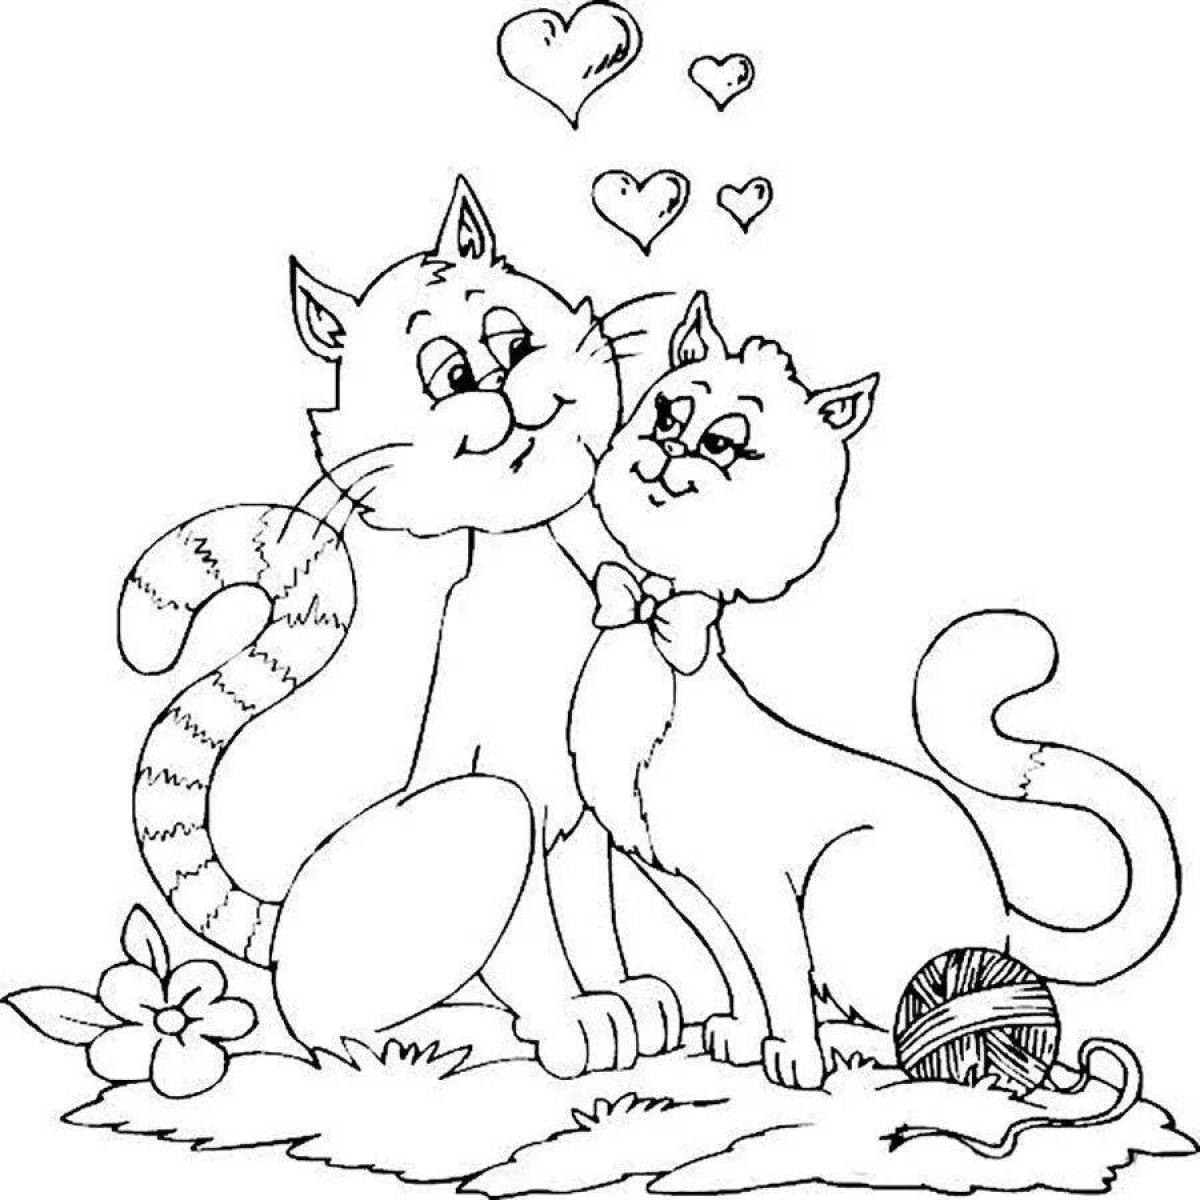 Energetic cats coloring pages